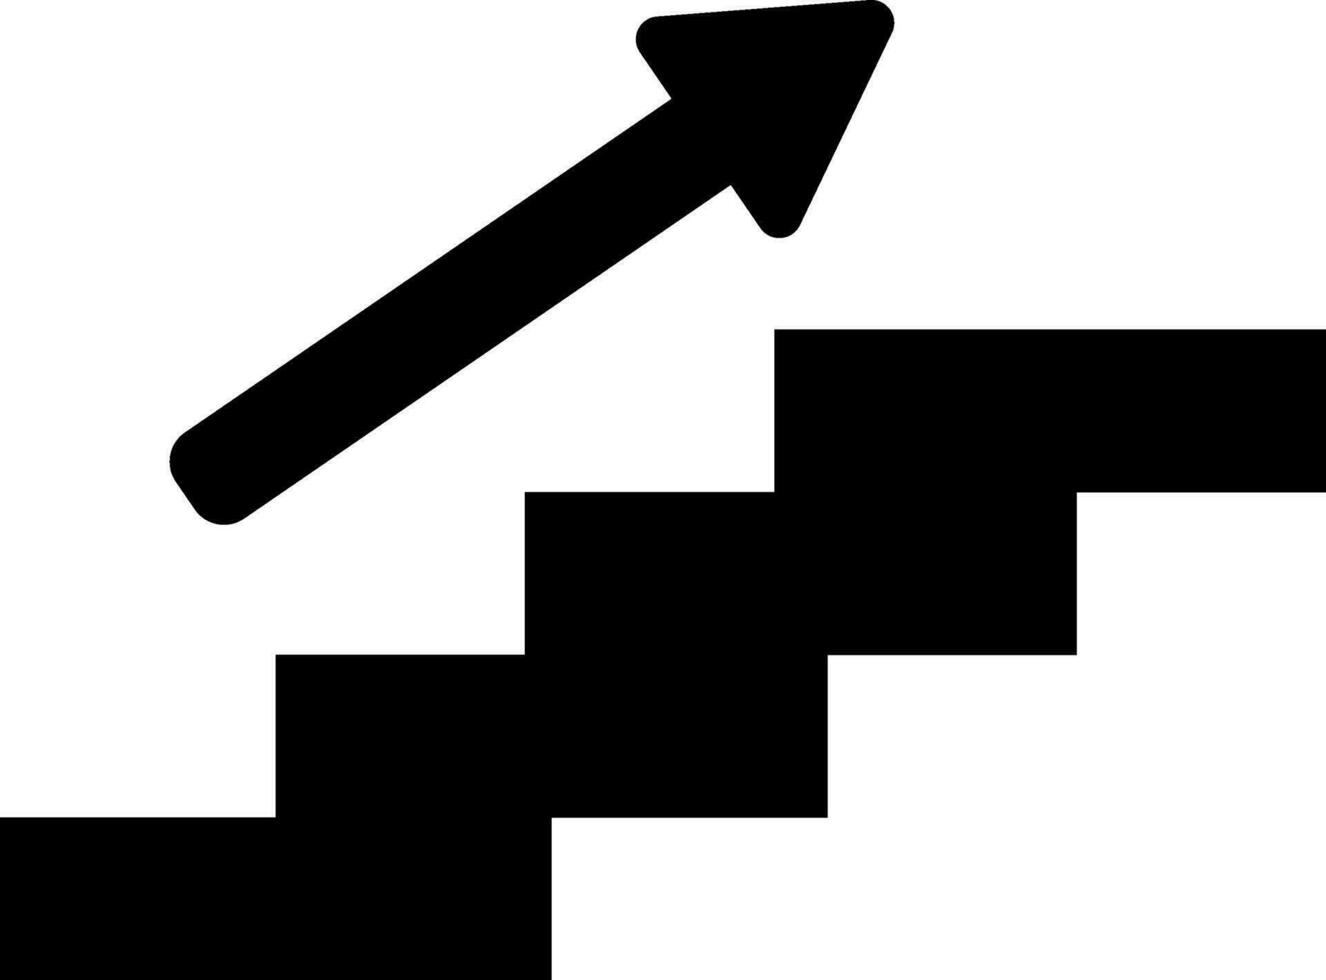 Black stairs up icon in flat style. vector